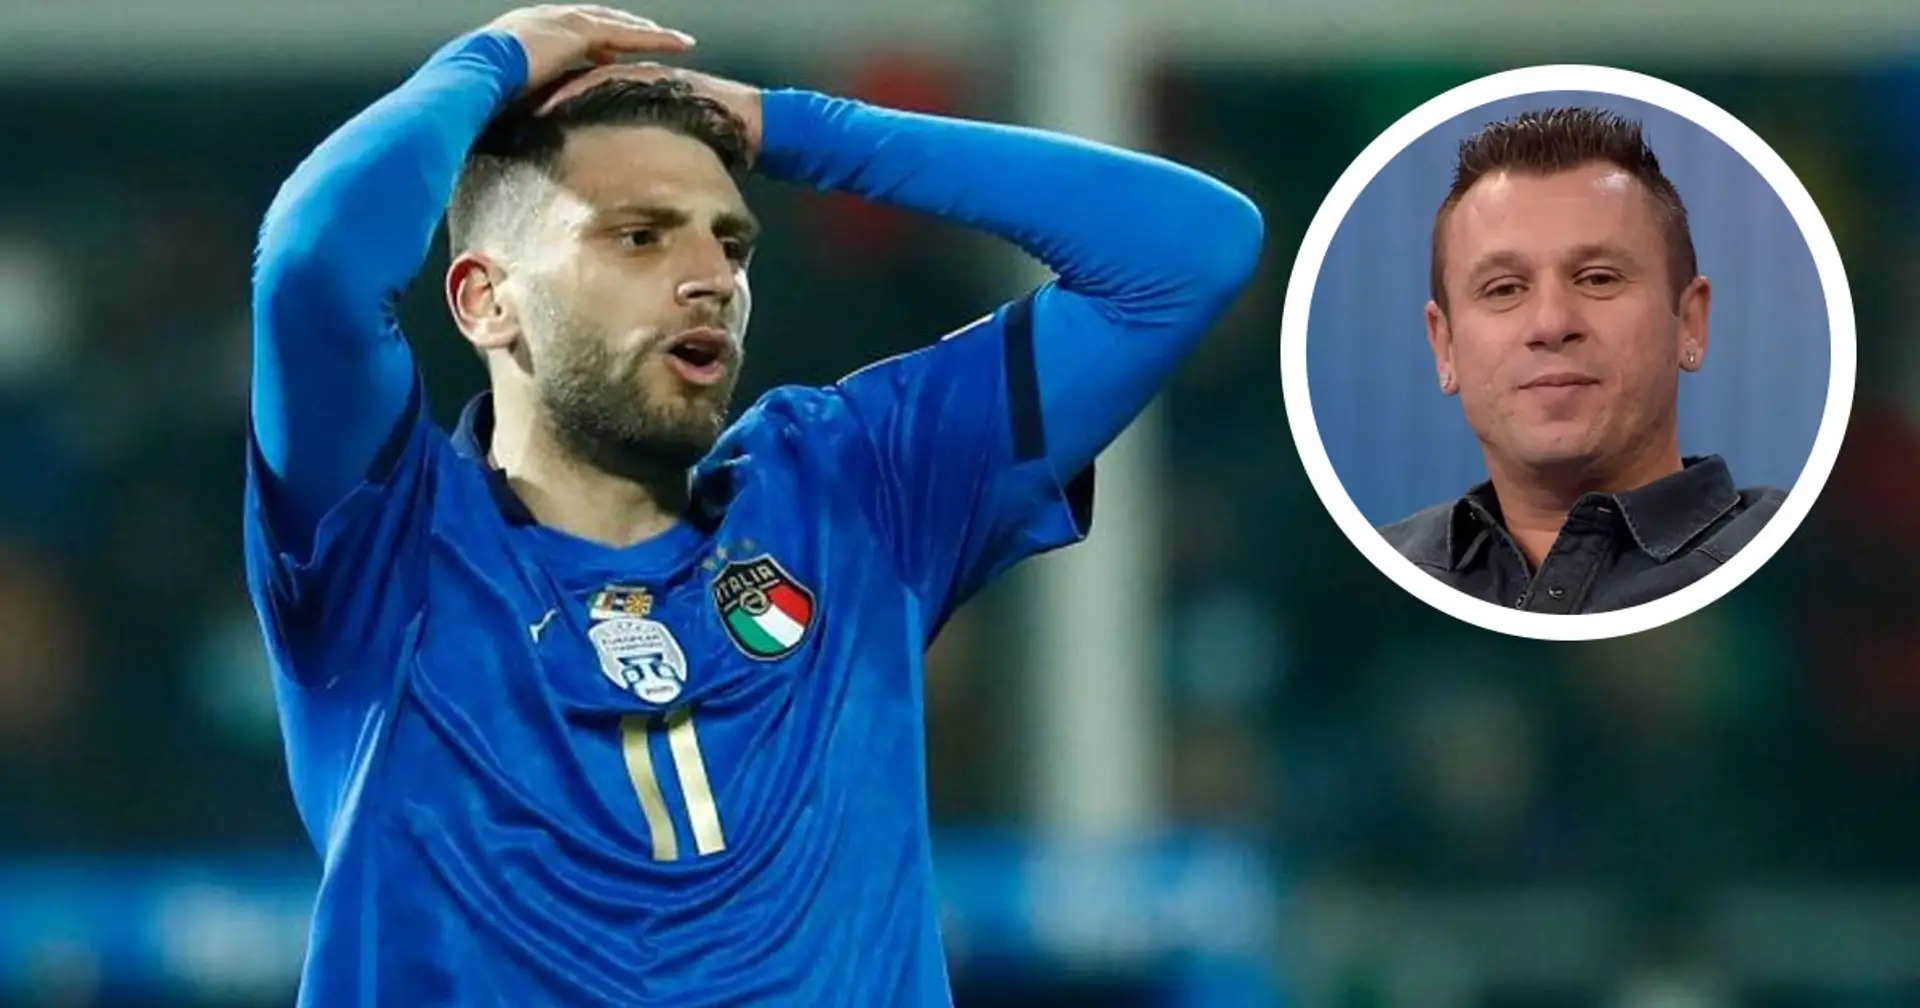 'Italian football is disgusting. All we do now is make a bad impression at the international level': Ex-Italy striker Cassano